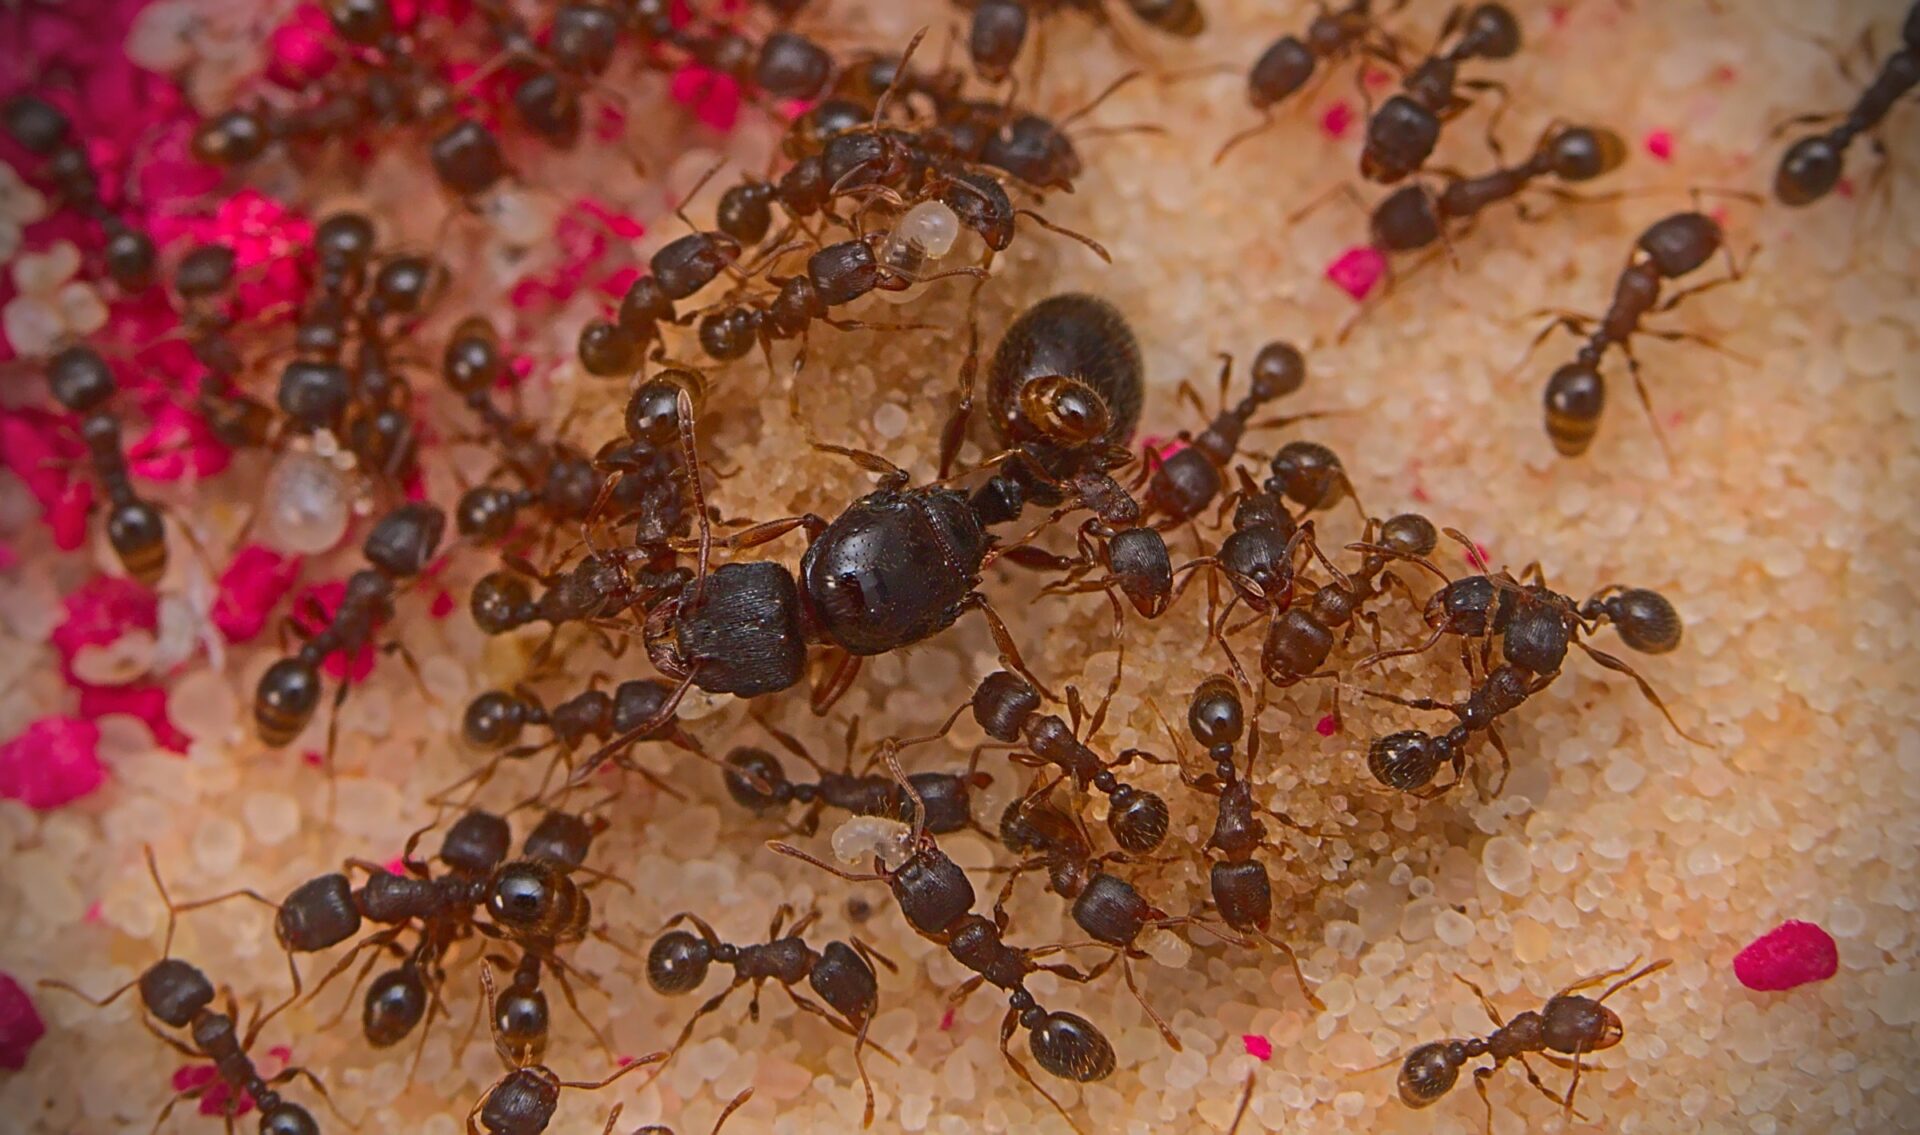 A Tetramorium immigrans queen with her colony.